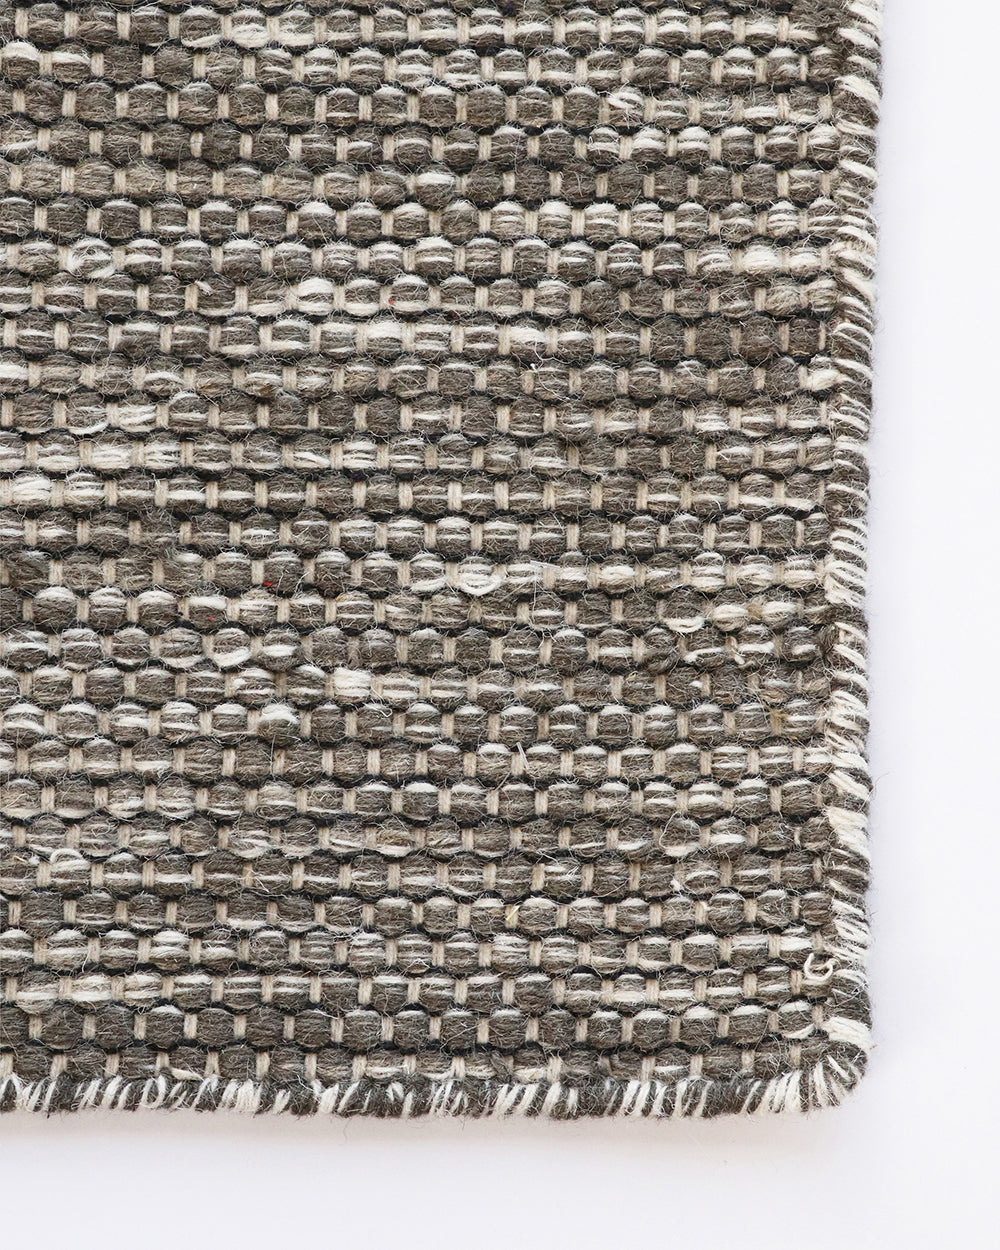 Abbas Floor Rug Tightly handwoven from a dense wool blend, the flatweave design and generous size of our Abbas makes this rug perfect for dining rooms and areas of high foot traffic. The mottled sand tone complements most interior styles and creates a ref